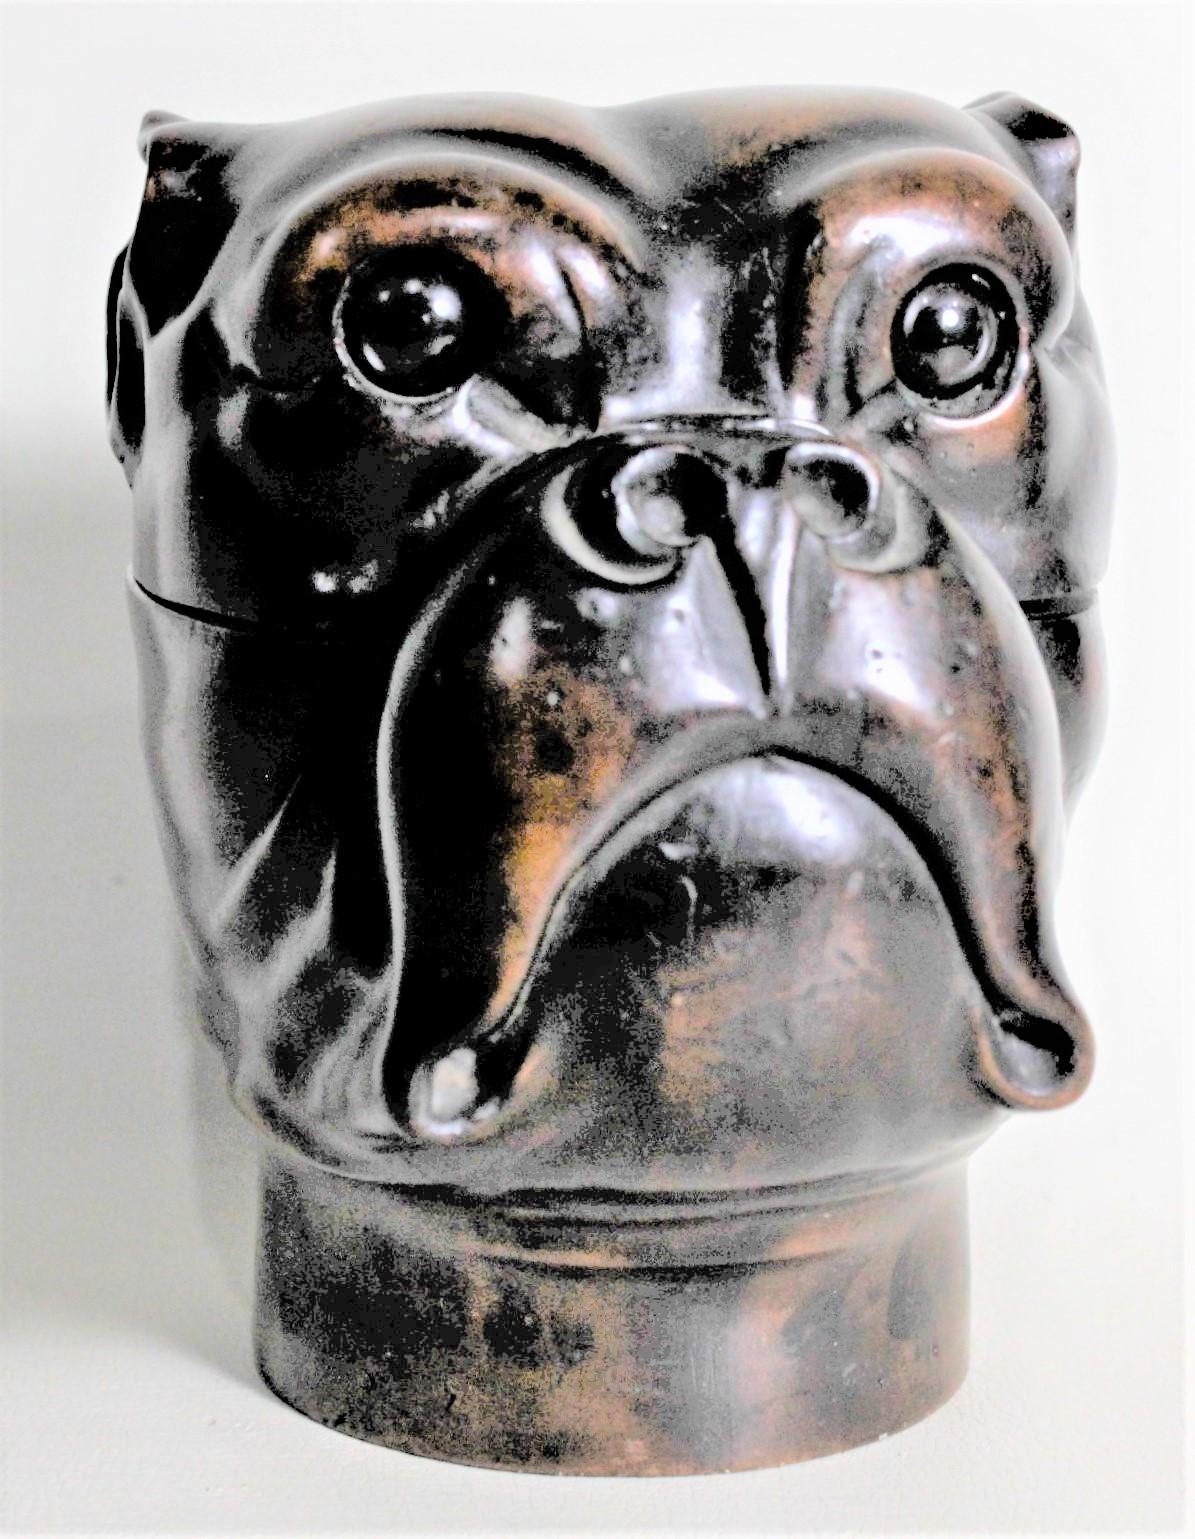 This antique hand carved dark walnut figural dog inkwell is unsigned, but presumed to have been made in Europe, likely Germany, in circa 1900 in the period Black Forest style. The hinged wooden inkwell depicts a dog's head, likely a Bulldog or